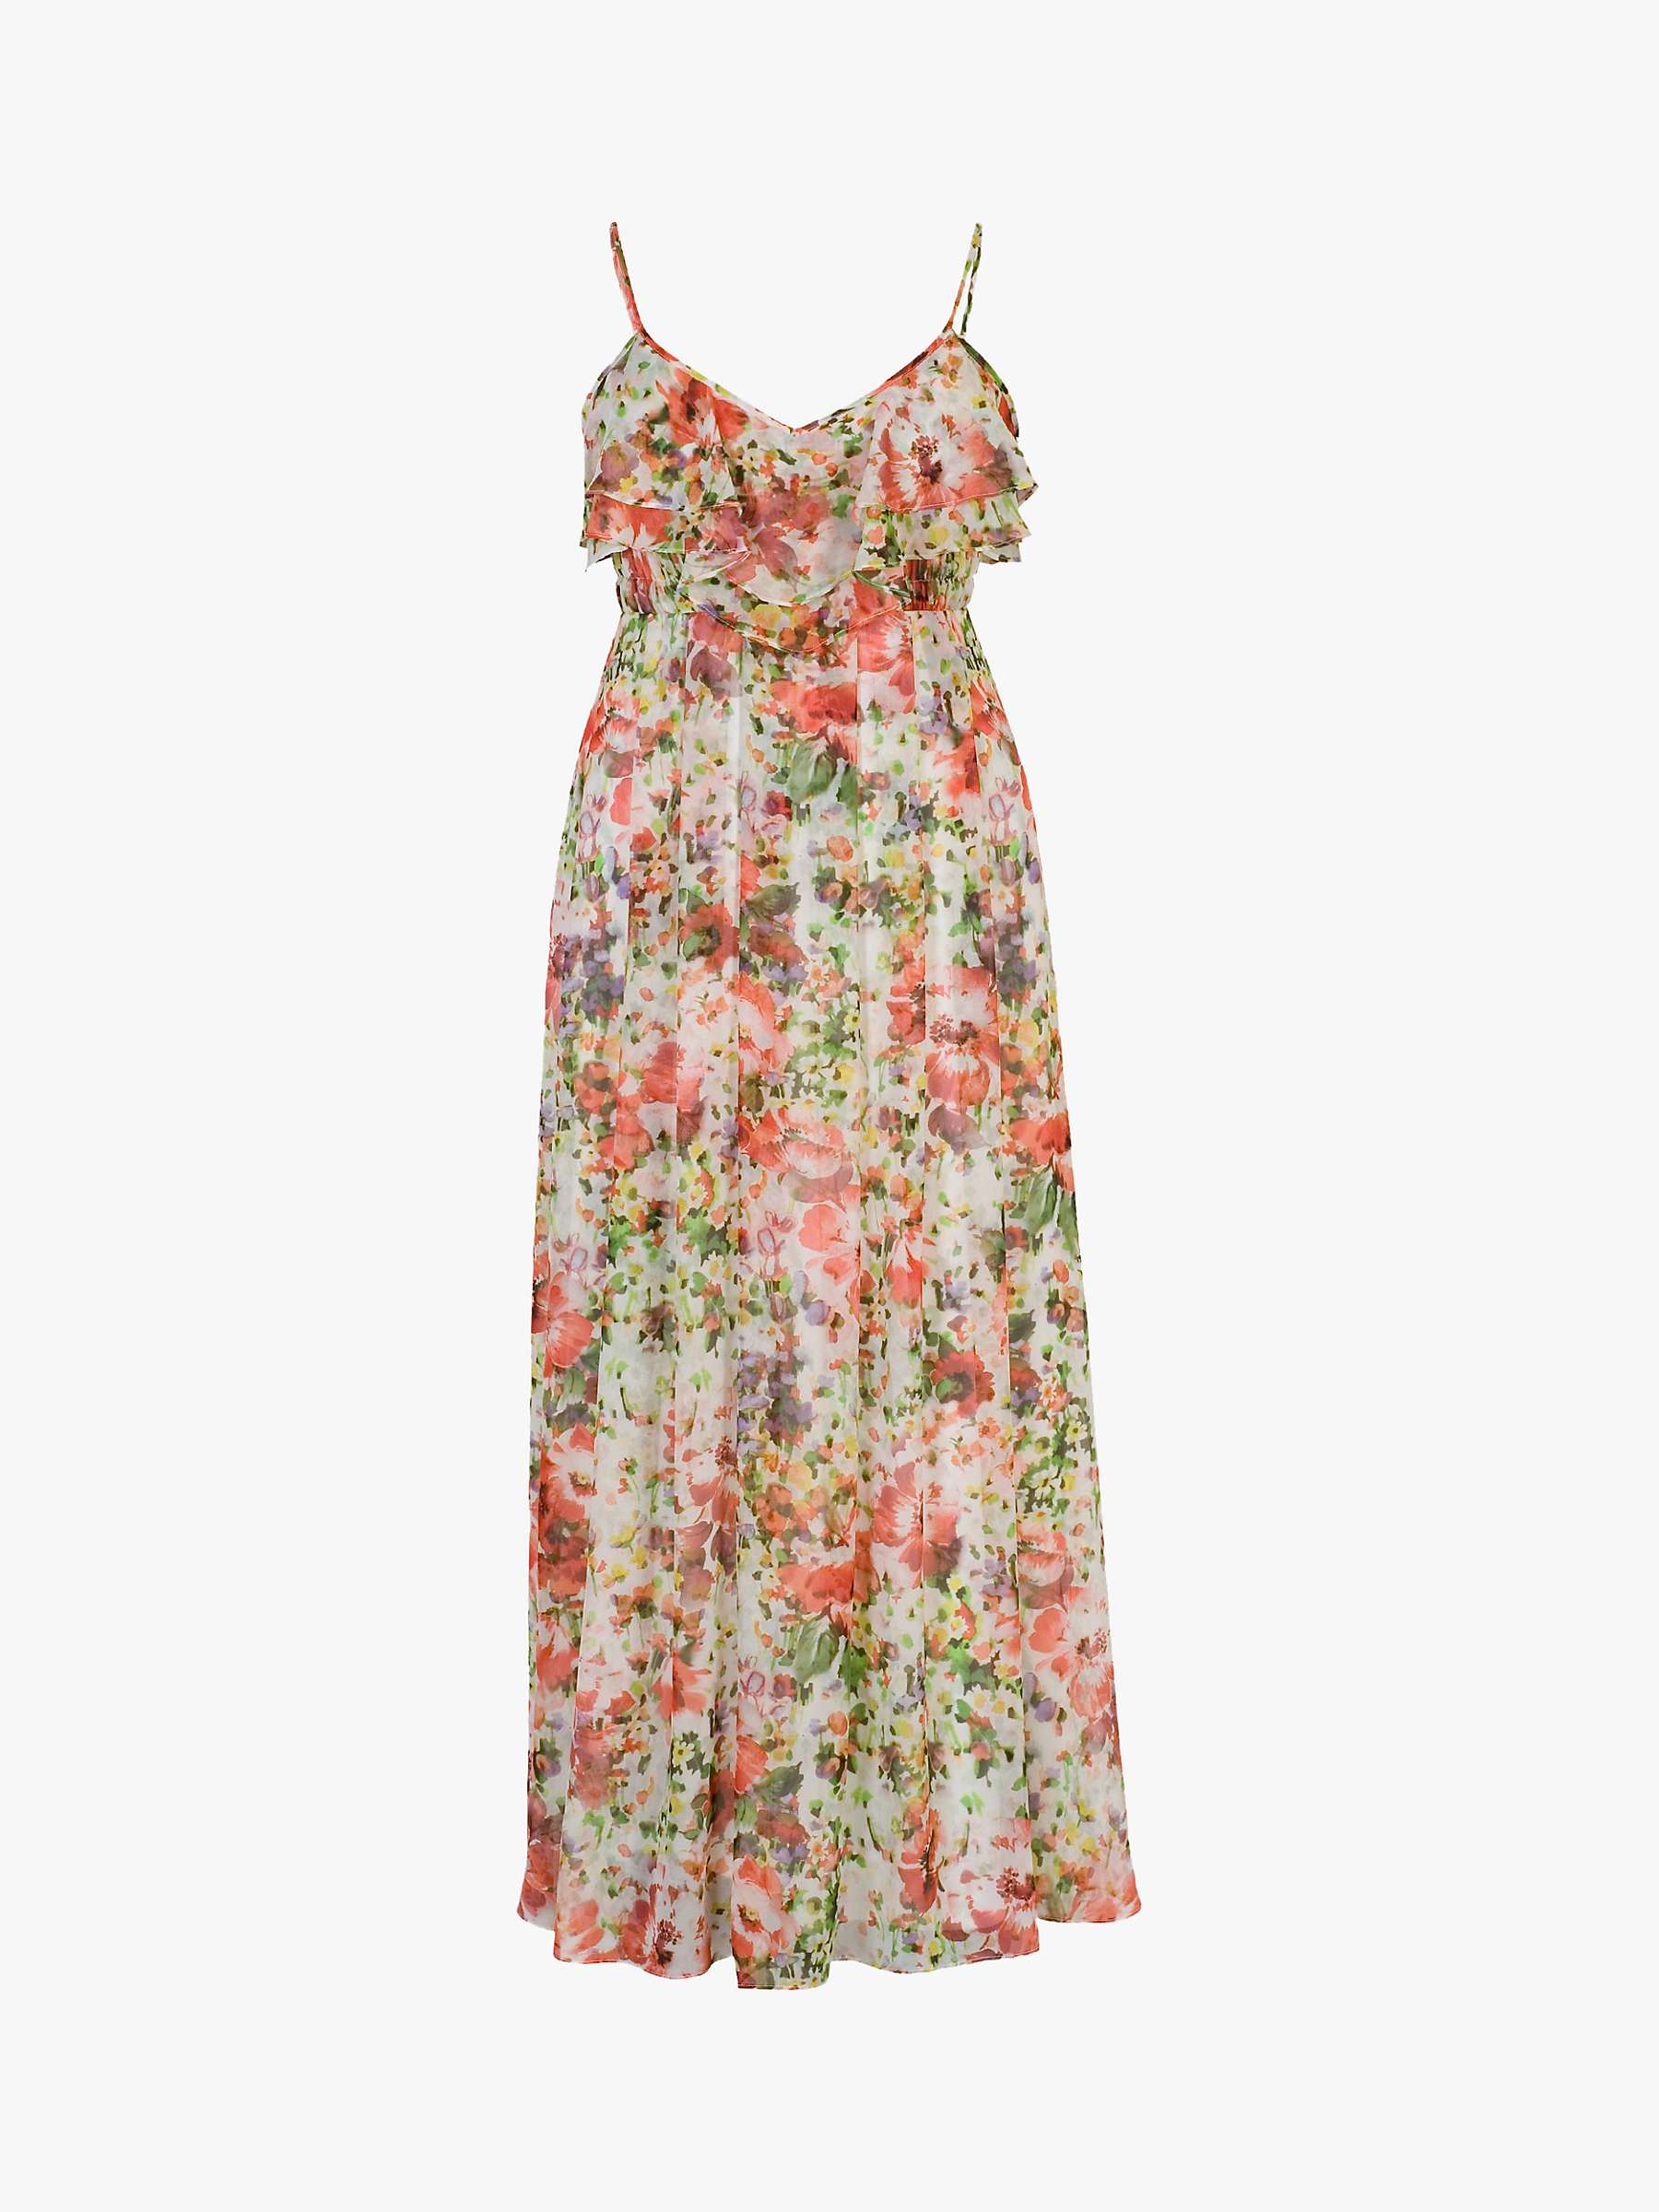 Buy chesca Floral Chiffon Maxi Dress, Multi Online at johnlewis.com